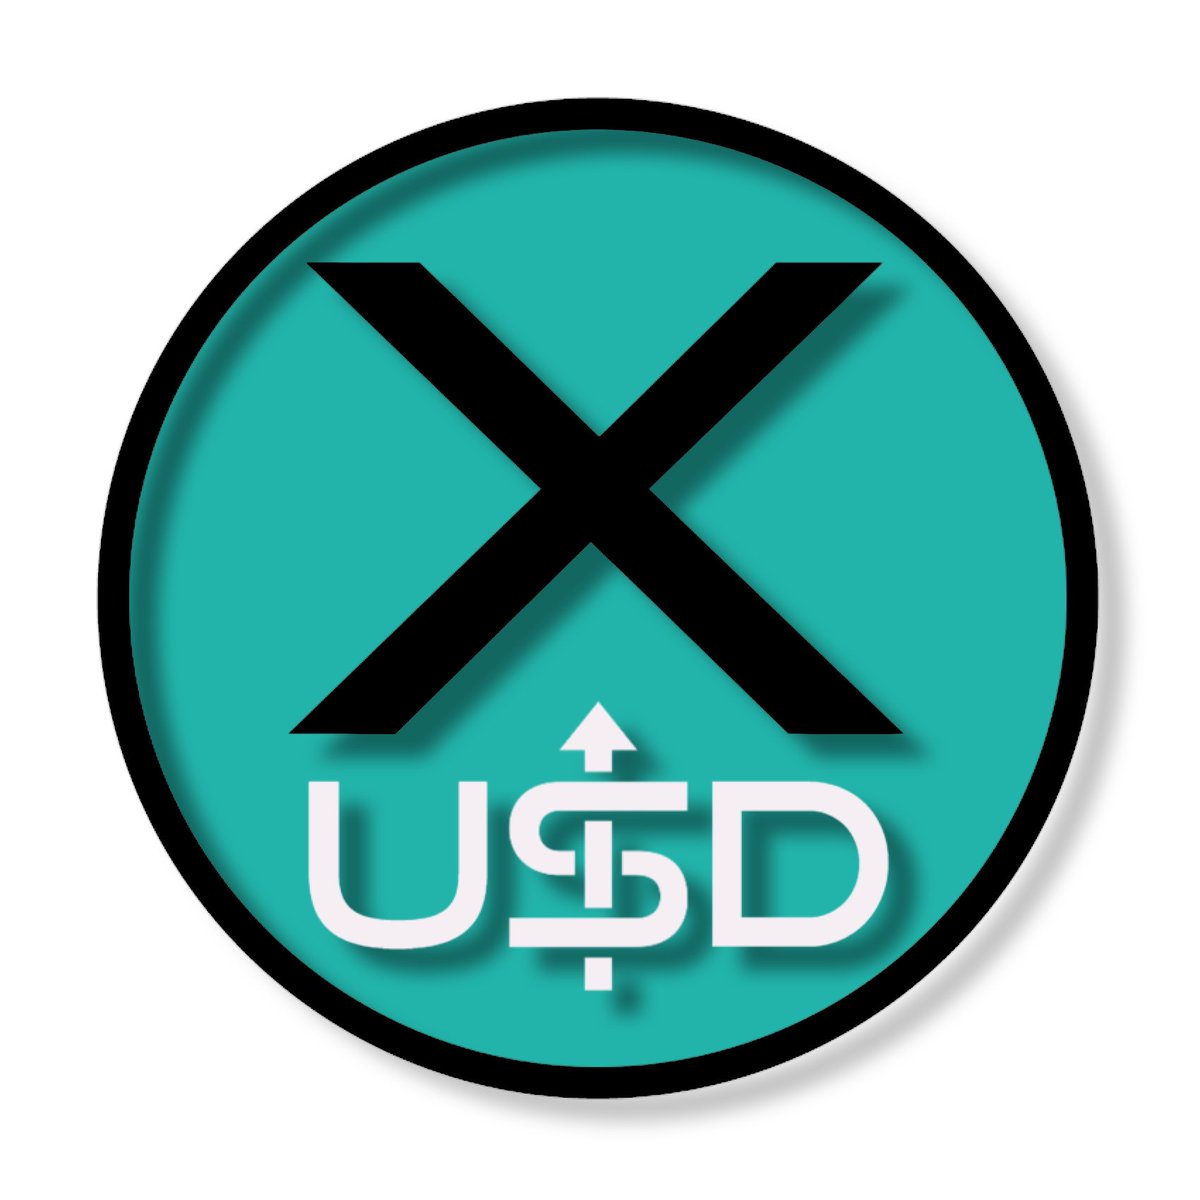 xUSD's price is 1.267860981930067349, which is up 26.786% since launch. #xUSD: #DeFi's best stablecoin staking protocol and collaborative token. #BuyTheRise